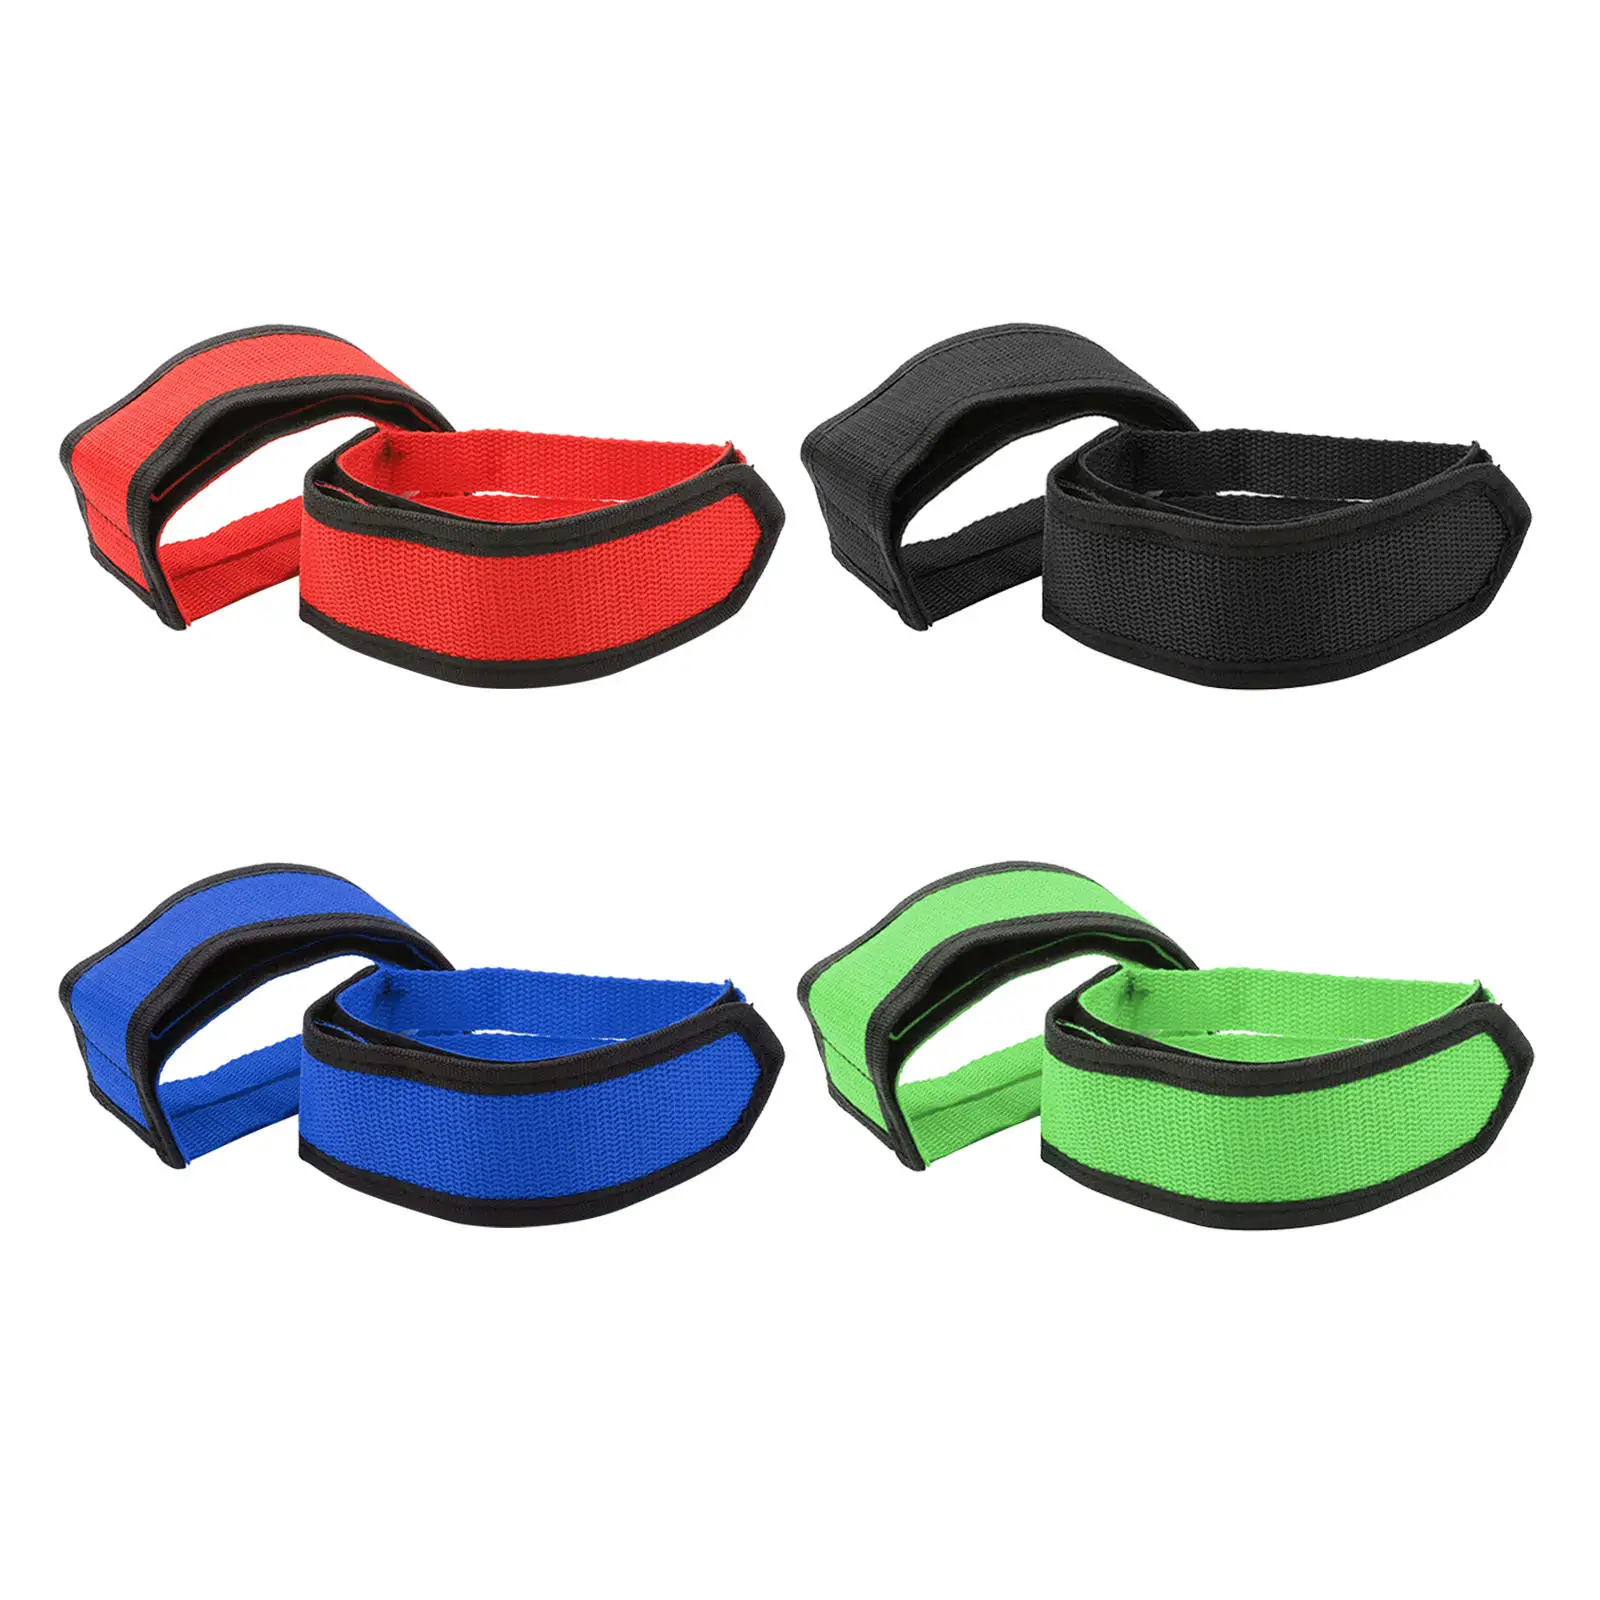 Pedal Strap Stationary Adjustable Toe Clips Straps for Outdoor Bicycle Road Bike Adults